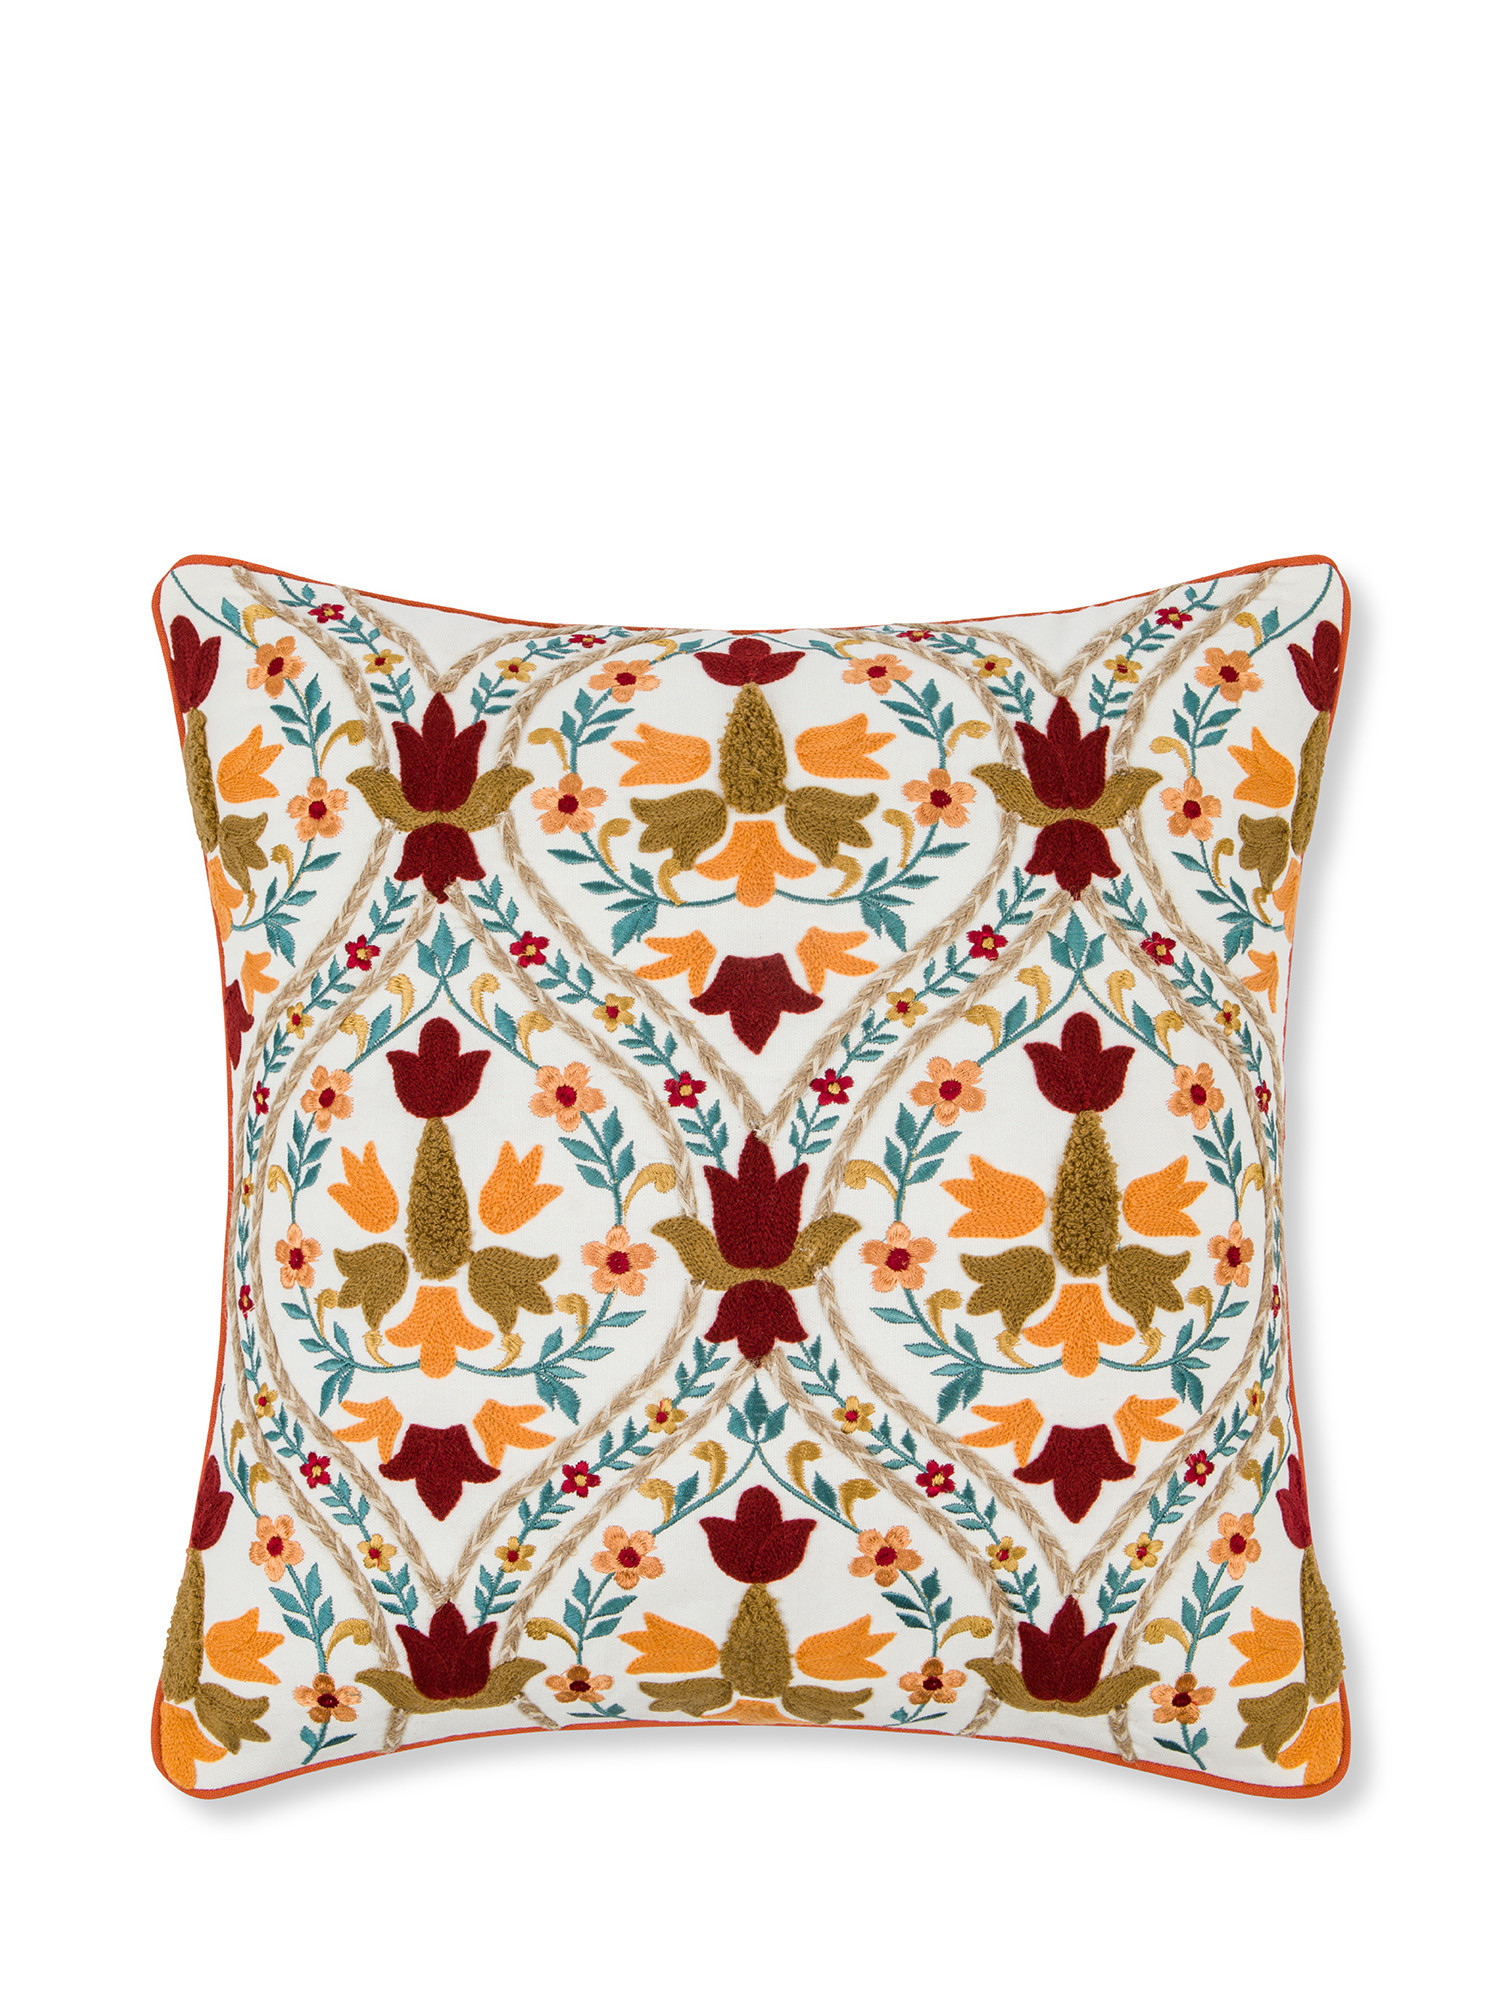 Embroidered cushion with Folk pattern 45x45cm, Multicolor, large image number 0